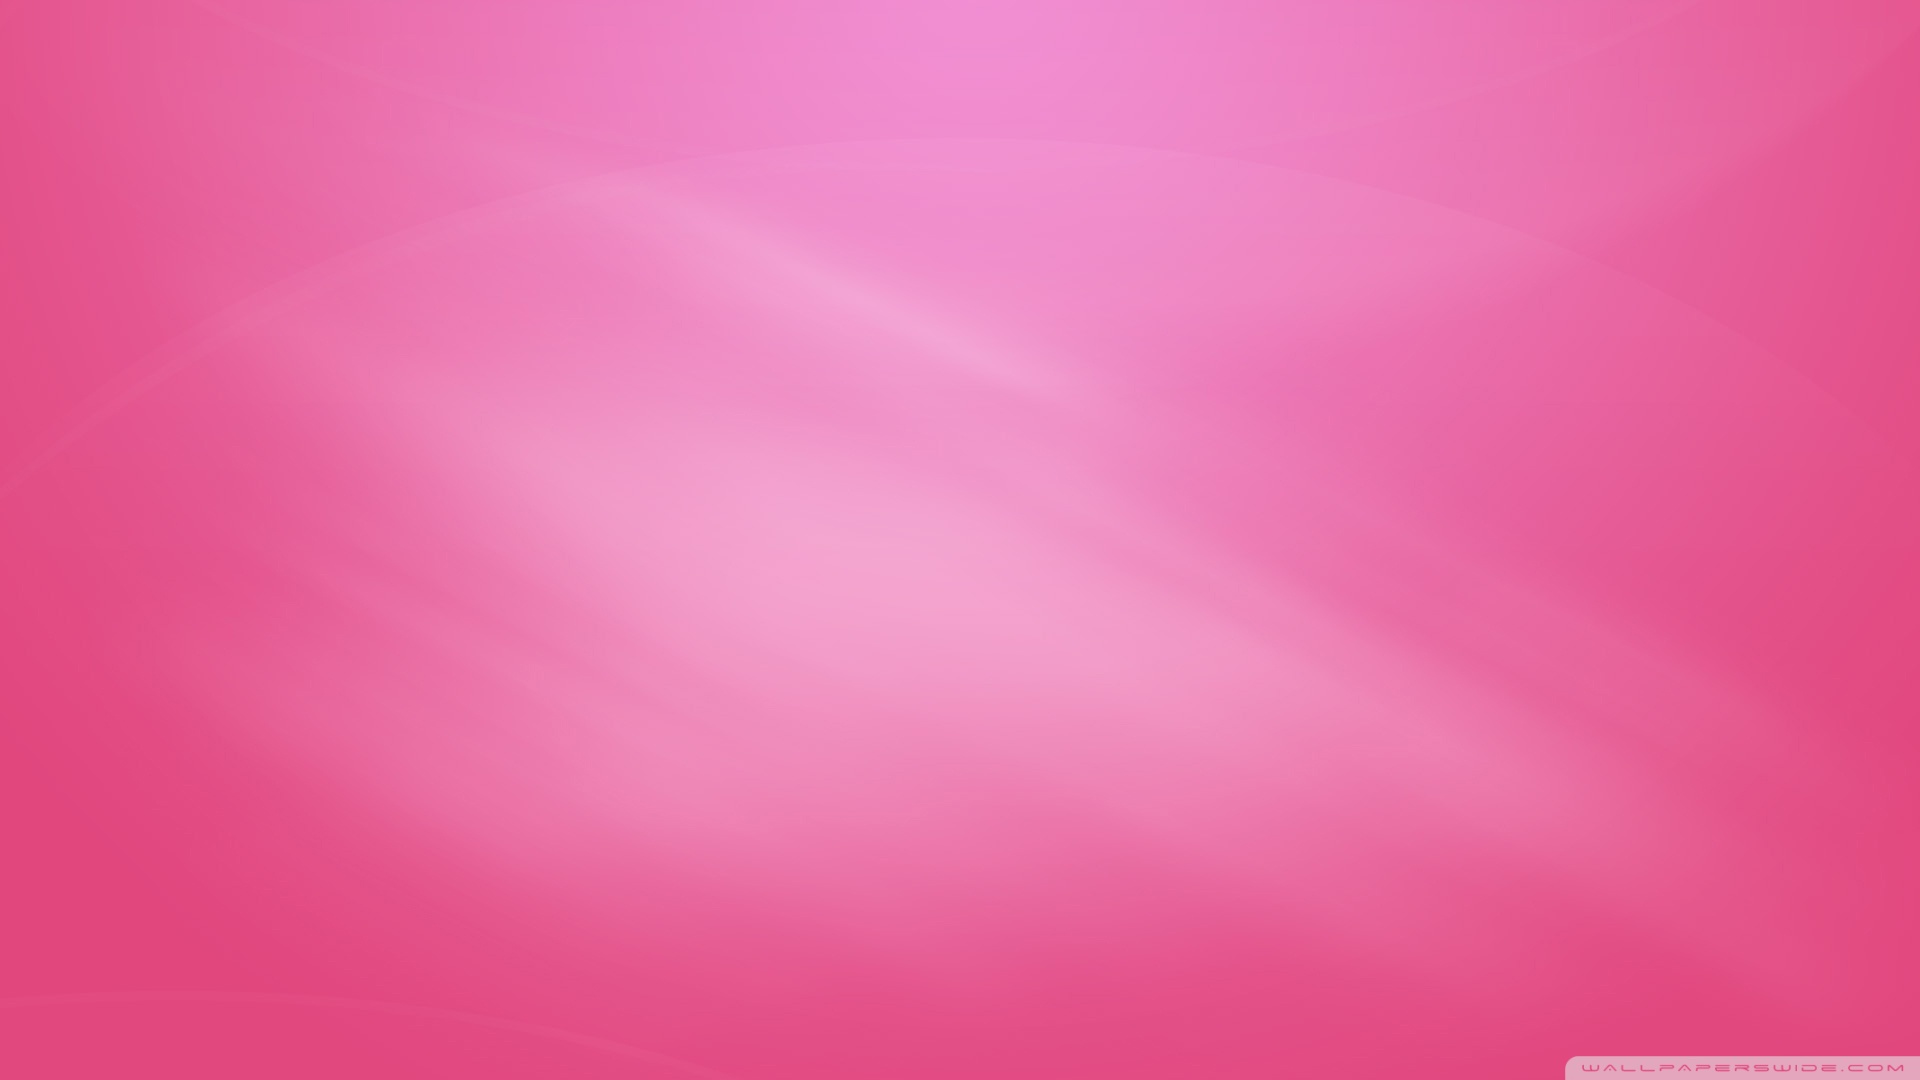 35 High Definition Pink Wallpapers Backgrounds For Free HD Wallpapers Download Free Map Images Wallpaper [wallpaper376.blogspot.com]